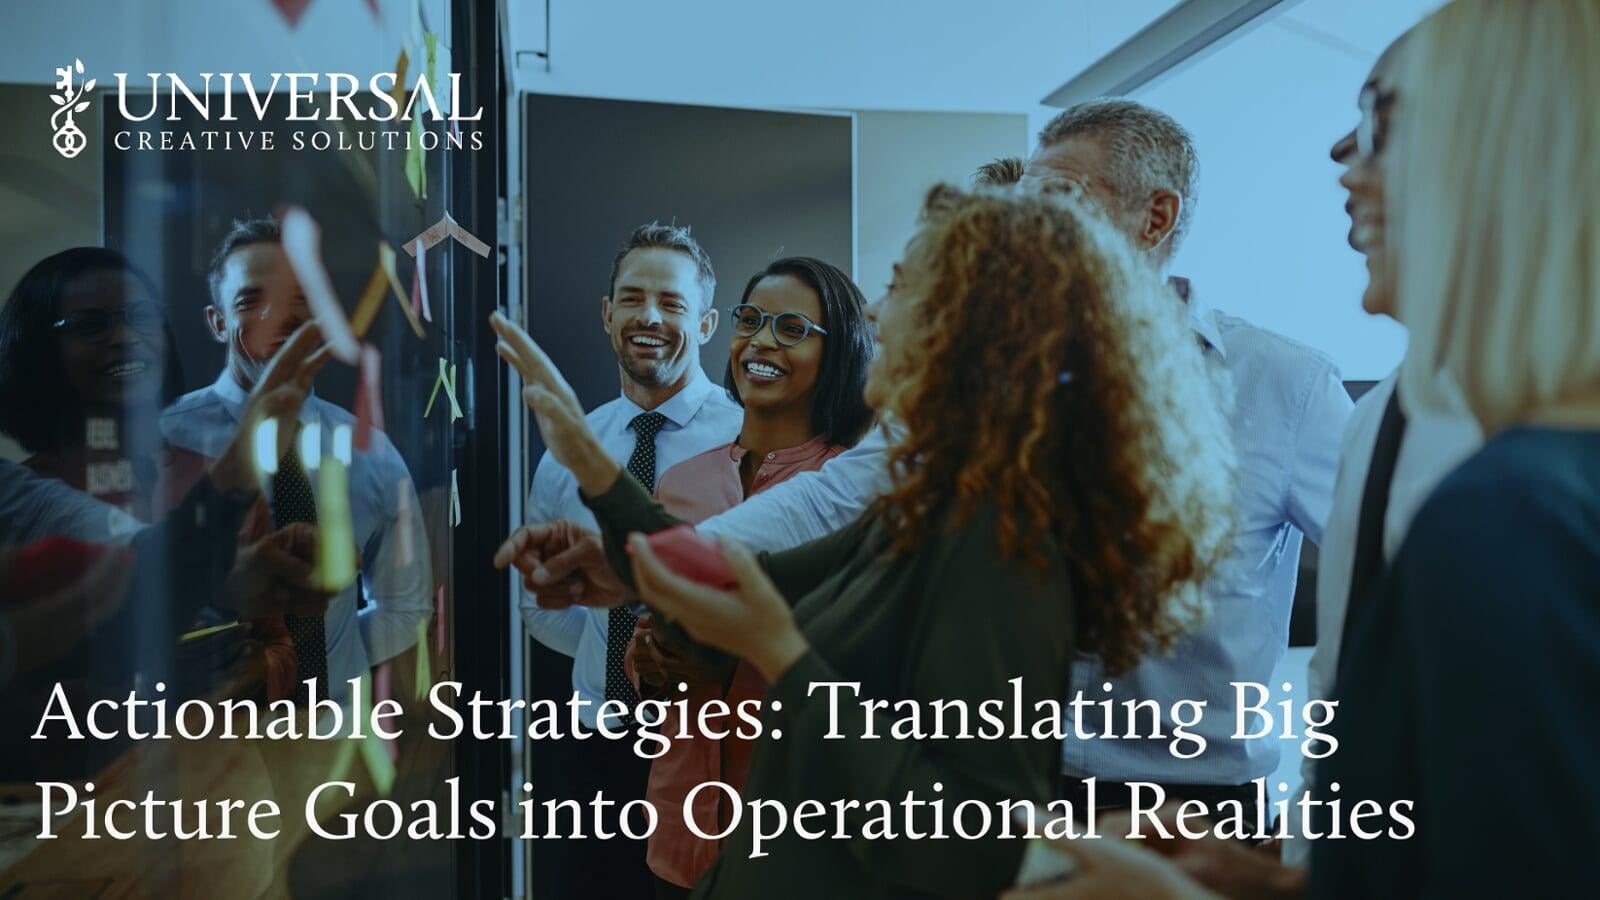 Actionable Strategies: Translating Big Picture Goals into Operational Realities